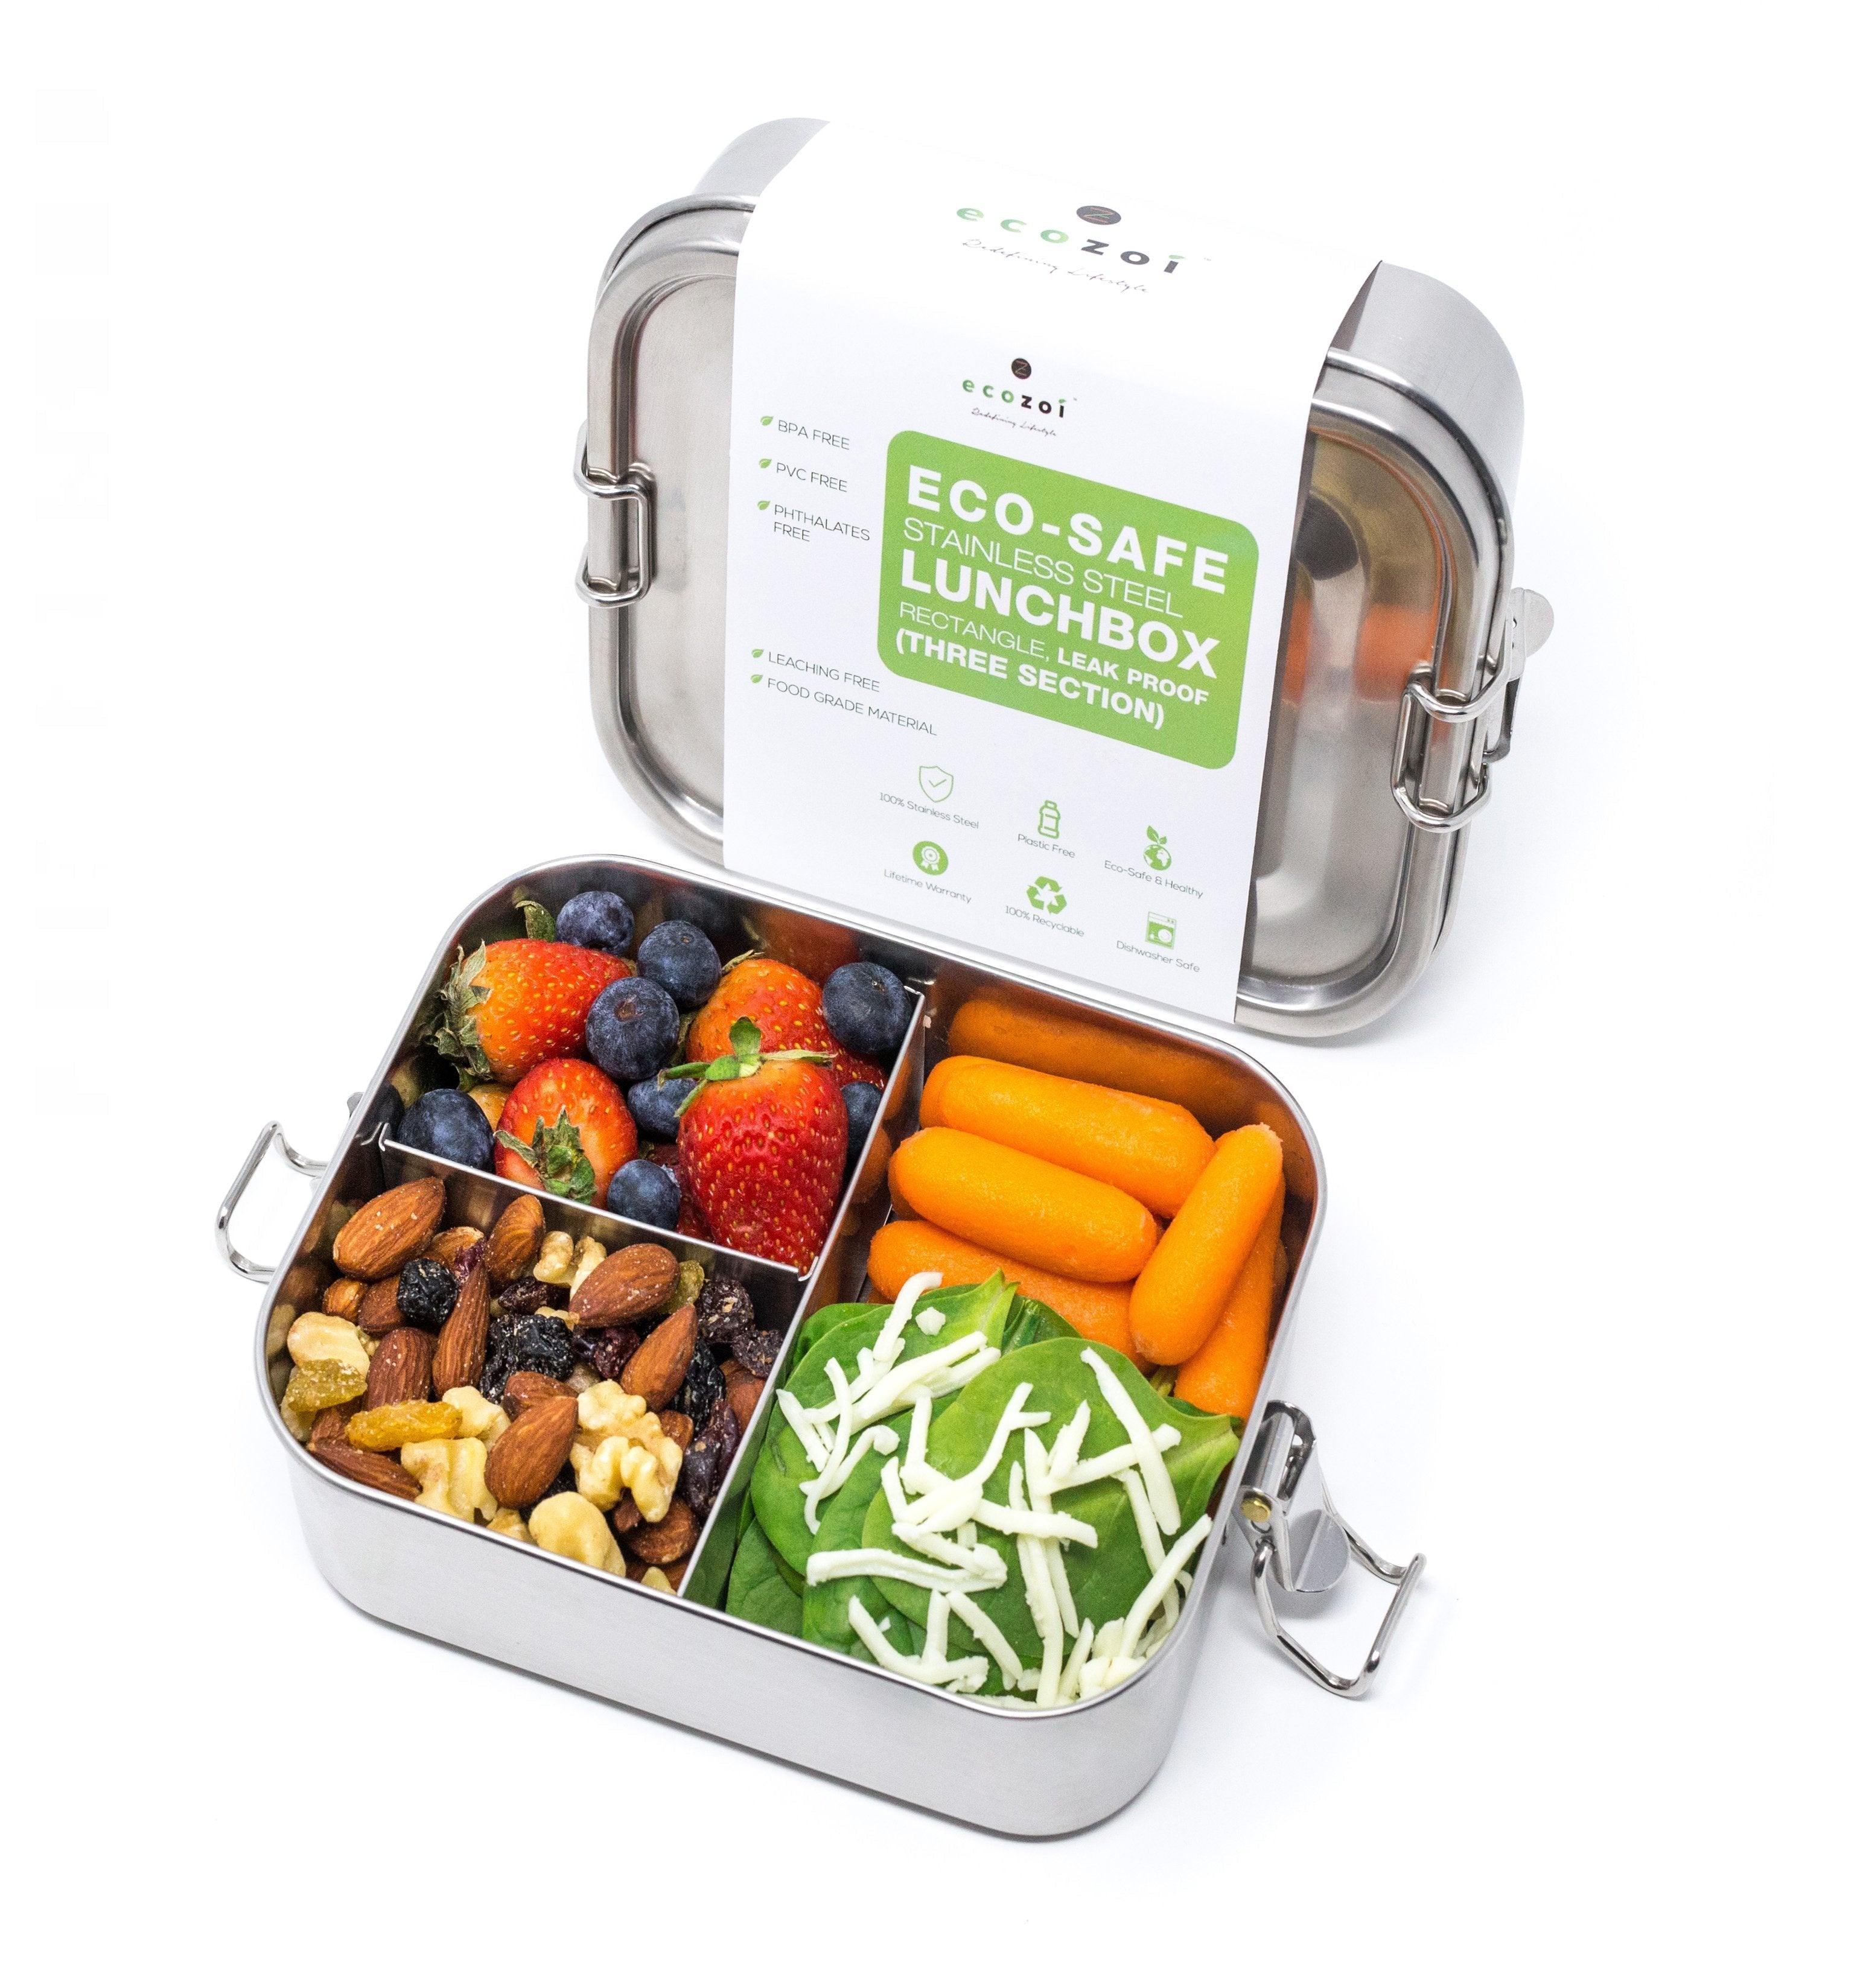 https://cdn.shopify.com/s/files/1/0429/8375/1835/products/Stainless_Steel_Eco_Lunch_Box__Leak_Proof__3_Compartment__35_Oz_or_1000ml__Plastic_free.jpg?v=1649165891&width=3097